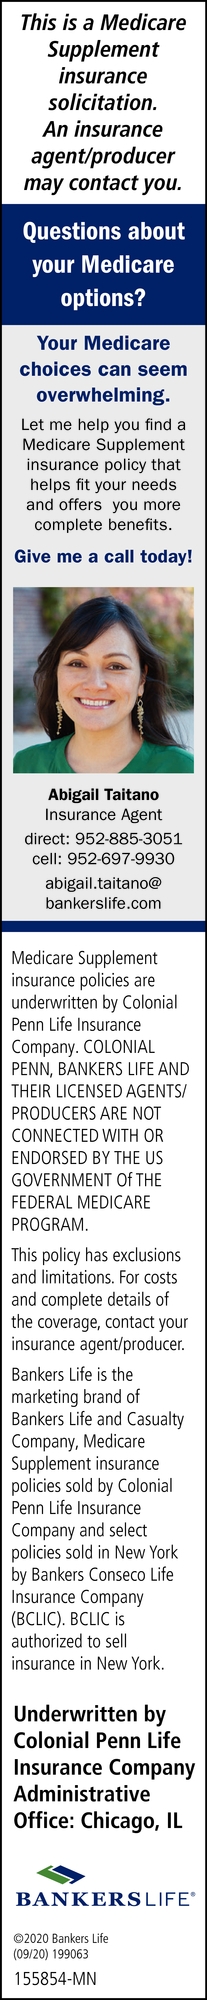 Questions About Your Medicare Options Bankers Life Abigail Taitano